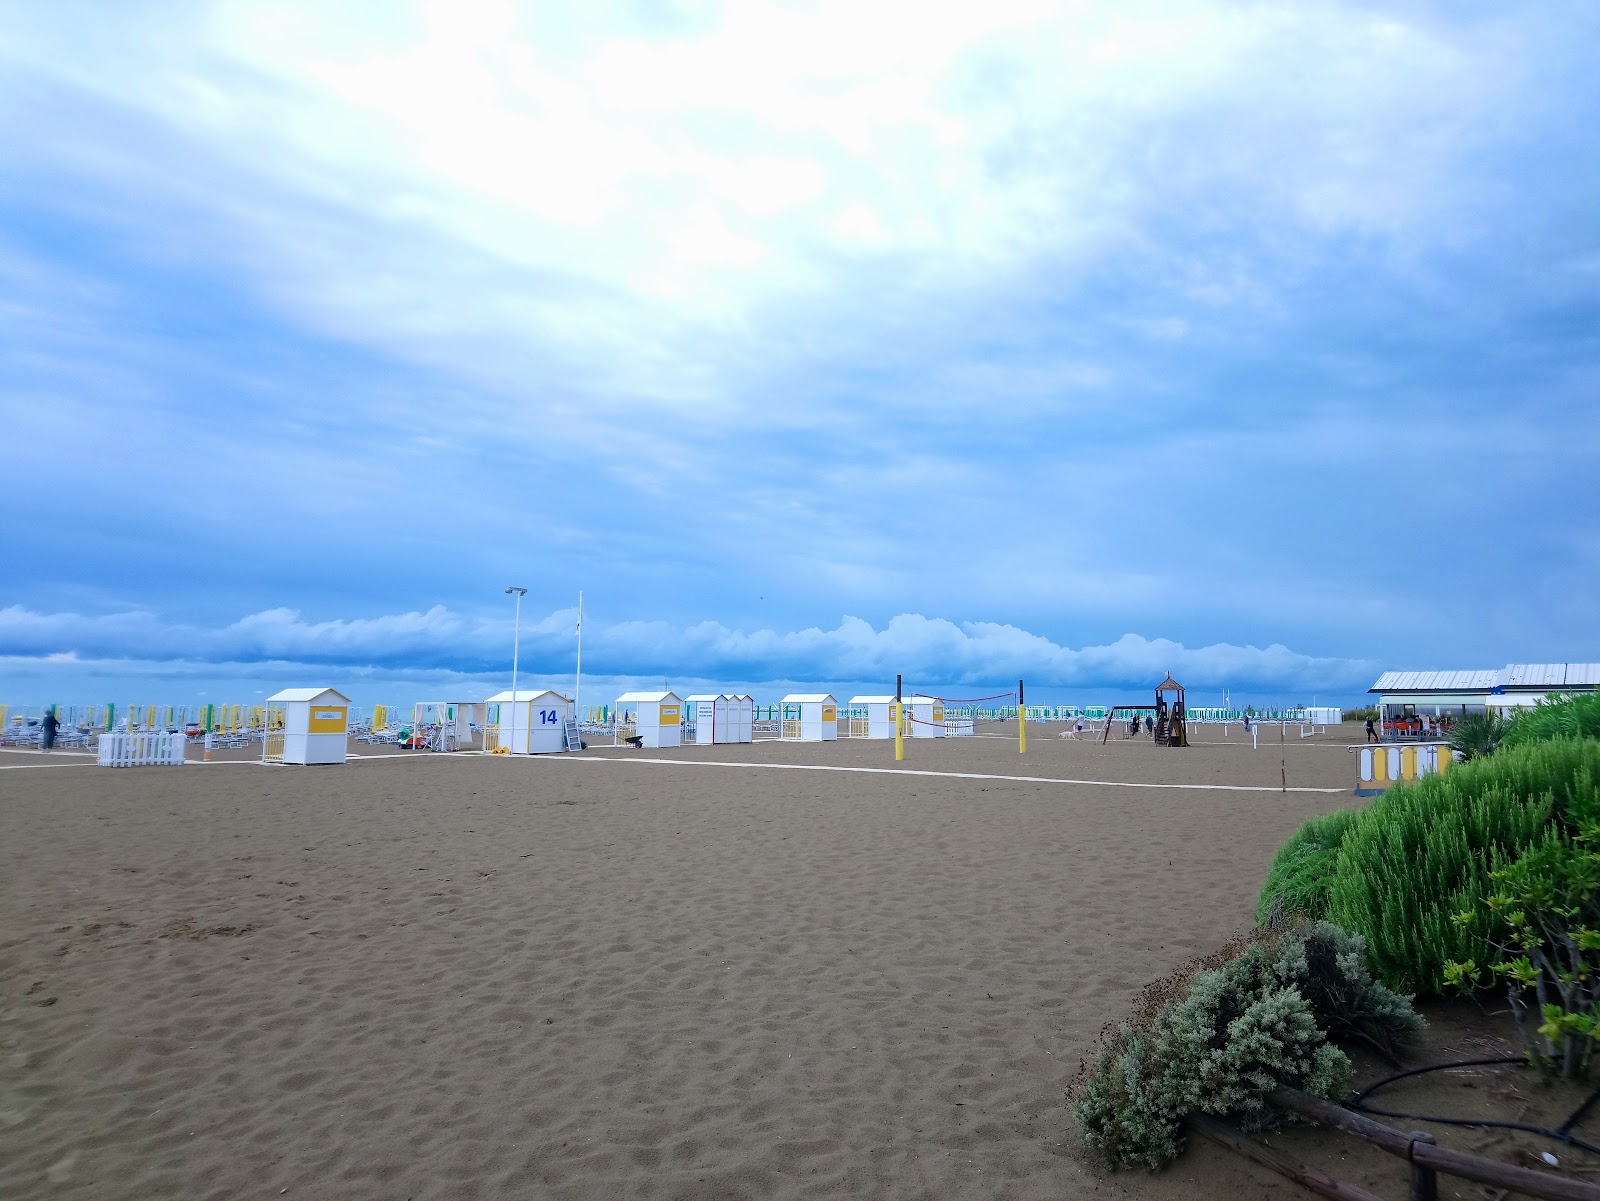 Photo of Spiaggia di Caorle with bright sand surface